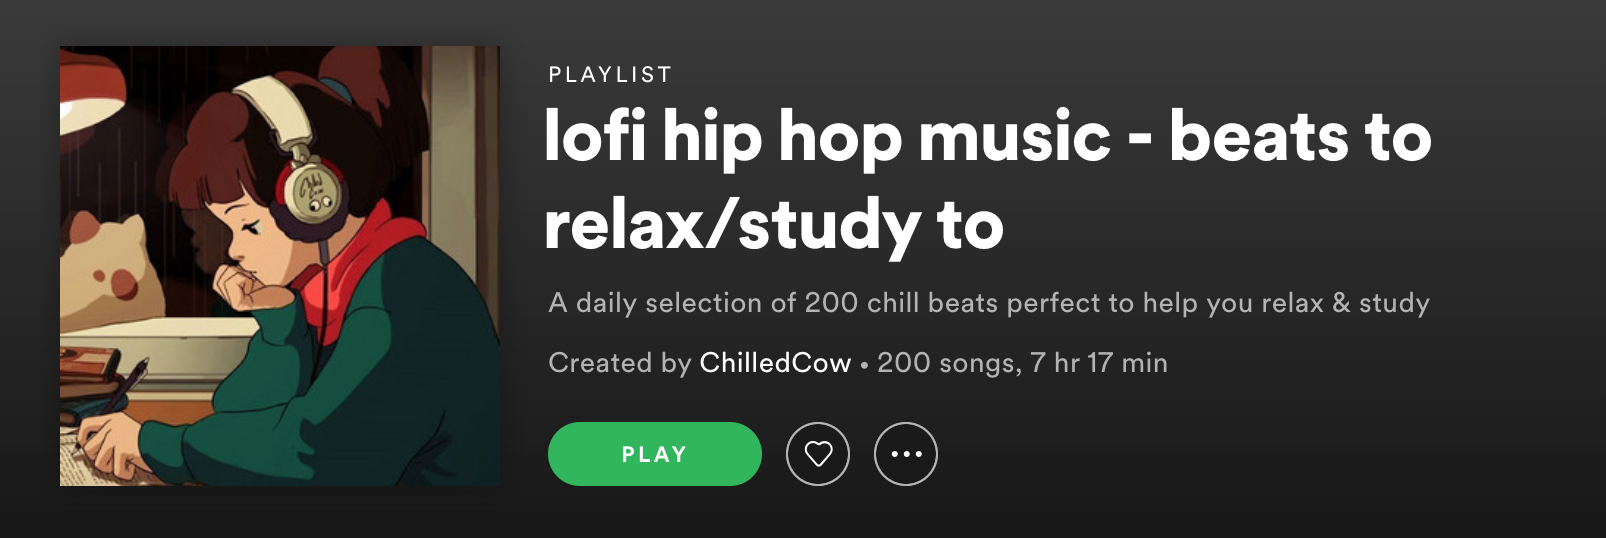 chilledcow spotify